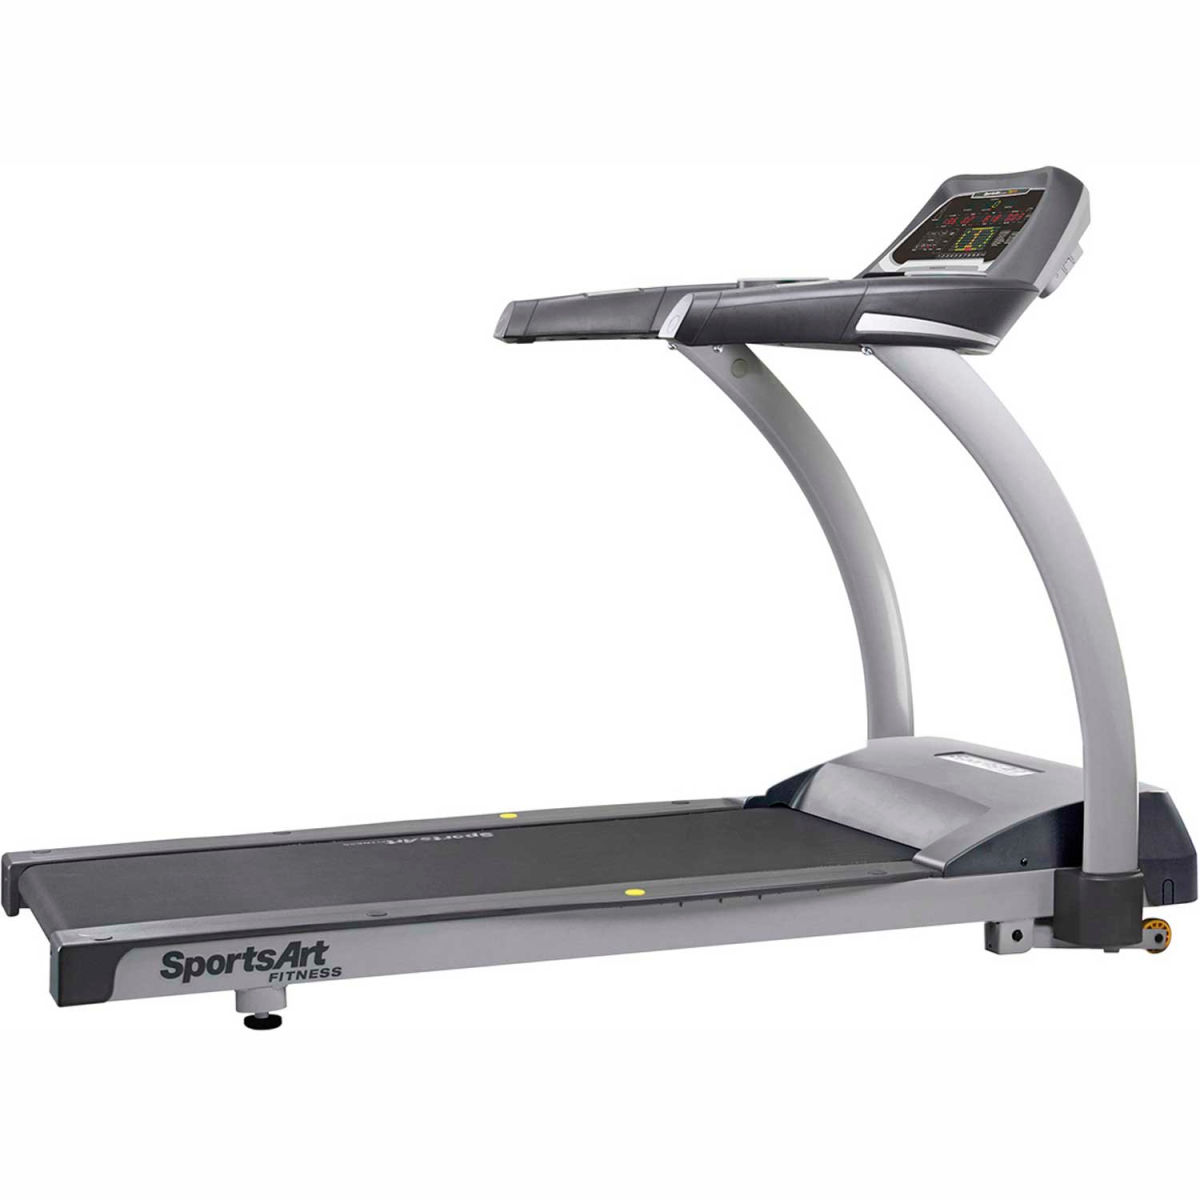 Picture of Fabrication Enterprises B2176879 SportsArt Fitness T615 Treadmill - 78 x 53 x 38 in.